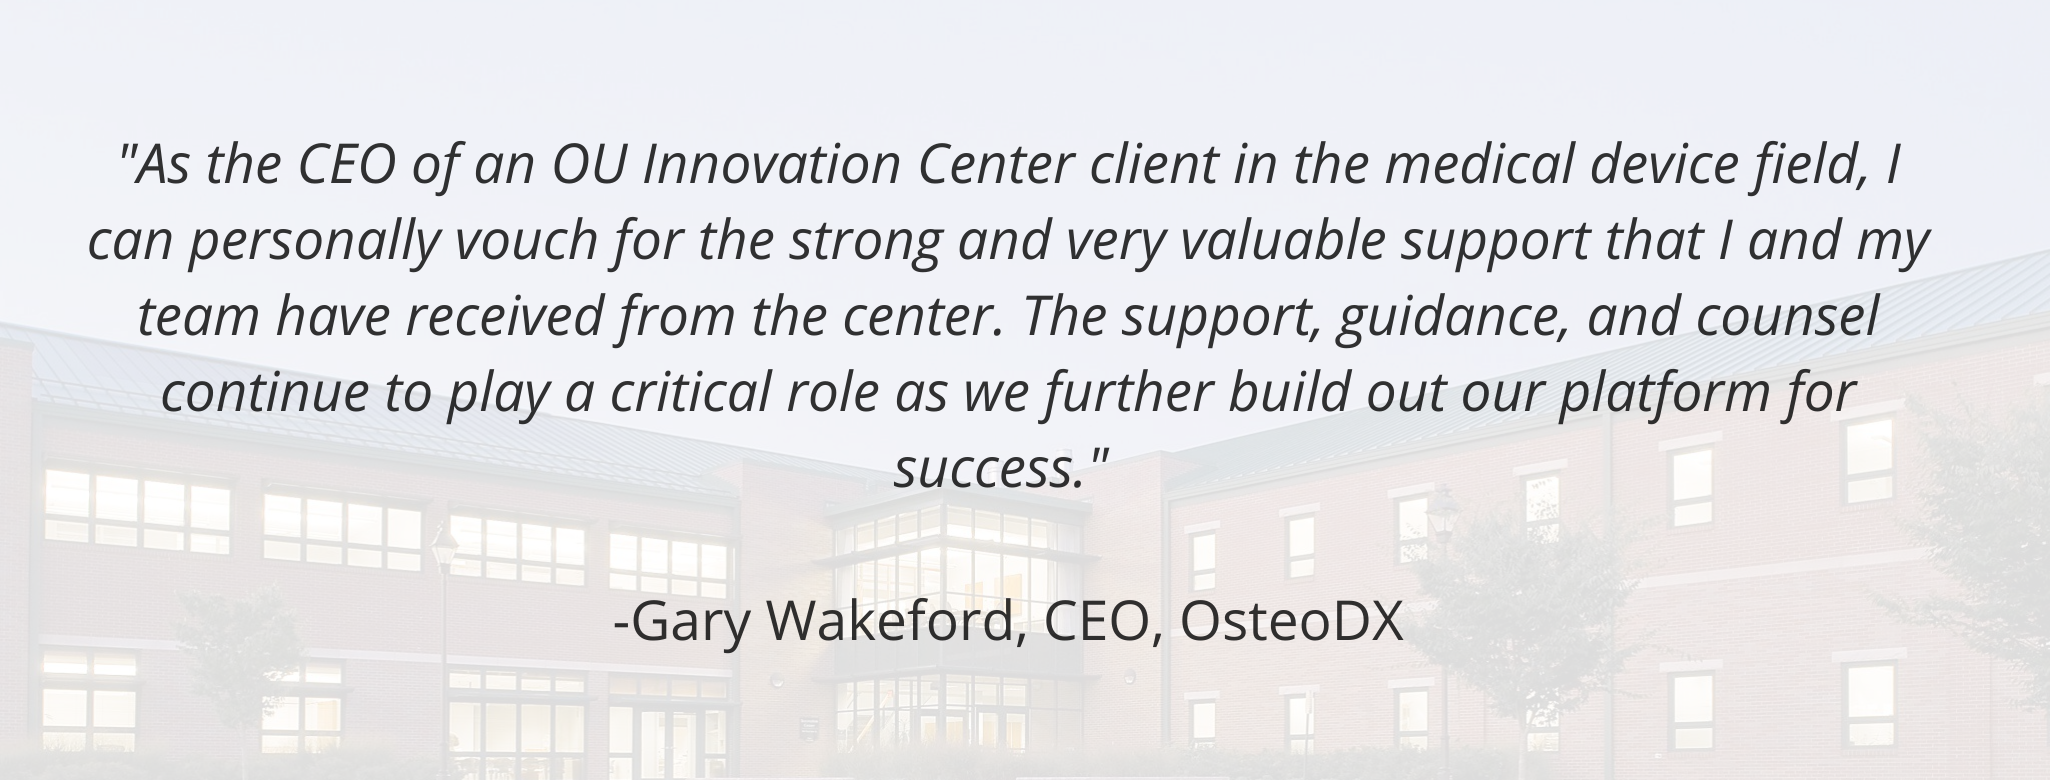 "As the CEO of an OU Innovation Center client in the medical device field, I can personally vouch for the strong and very valuable support that I and my team have received from the center. The support, guidance, and counsel continue to play a critical role as we further build out our platform for success."   -Gary Wakeford, CEO, OsteoDX